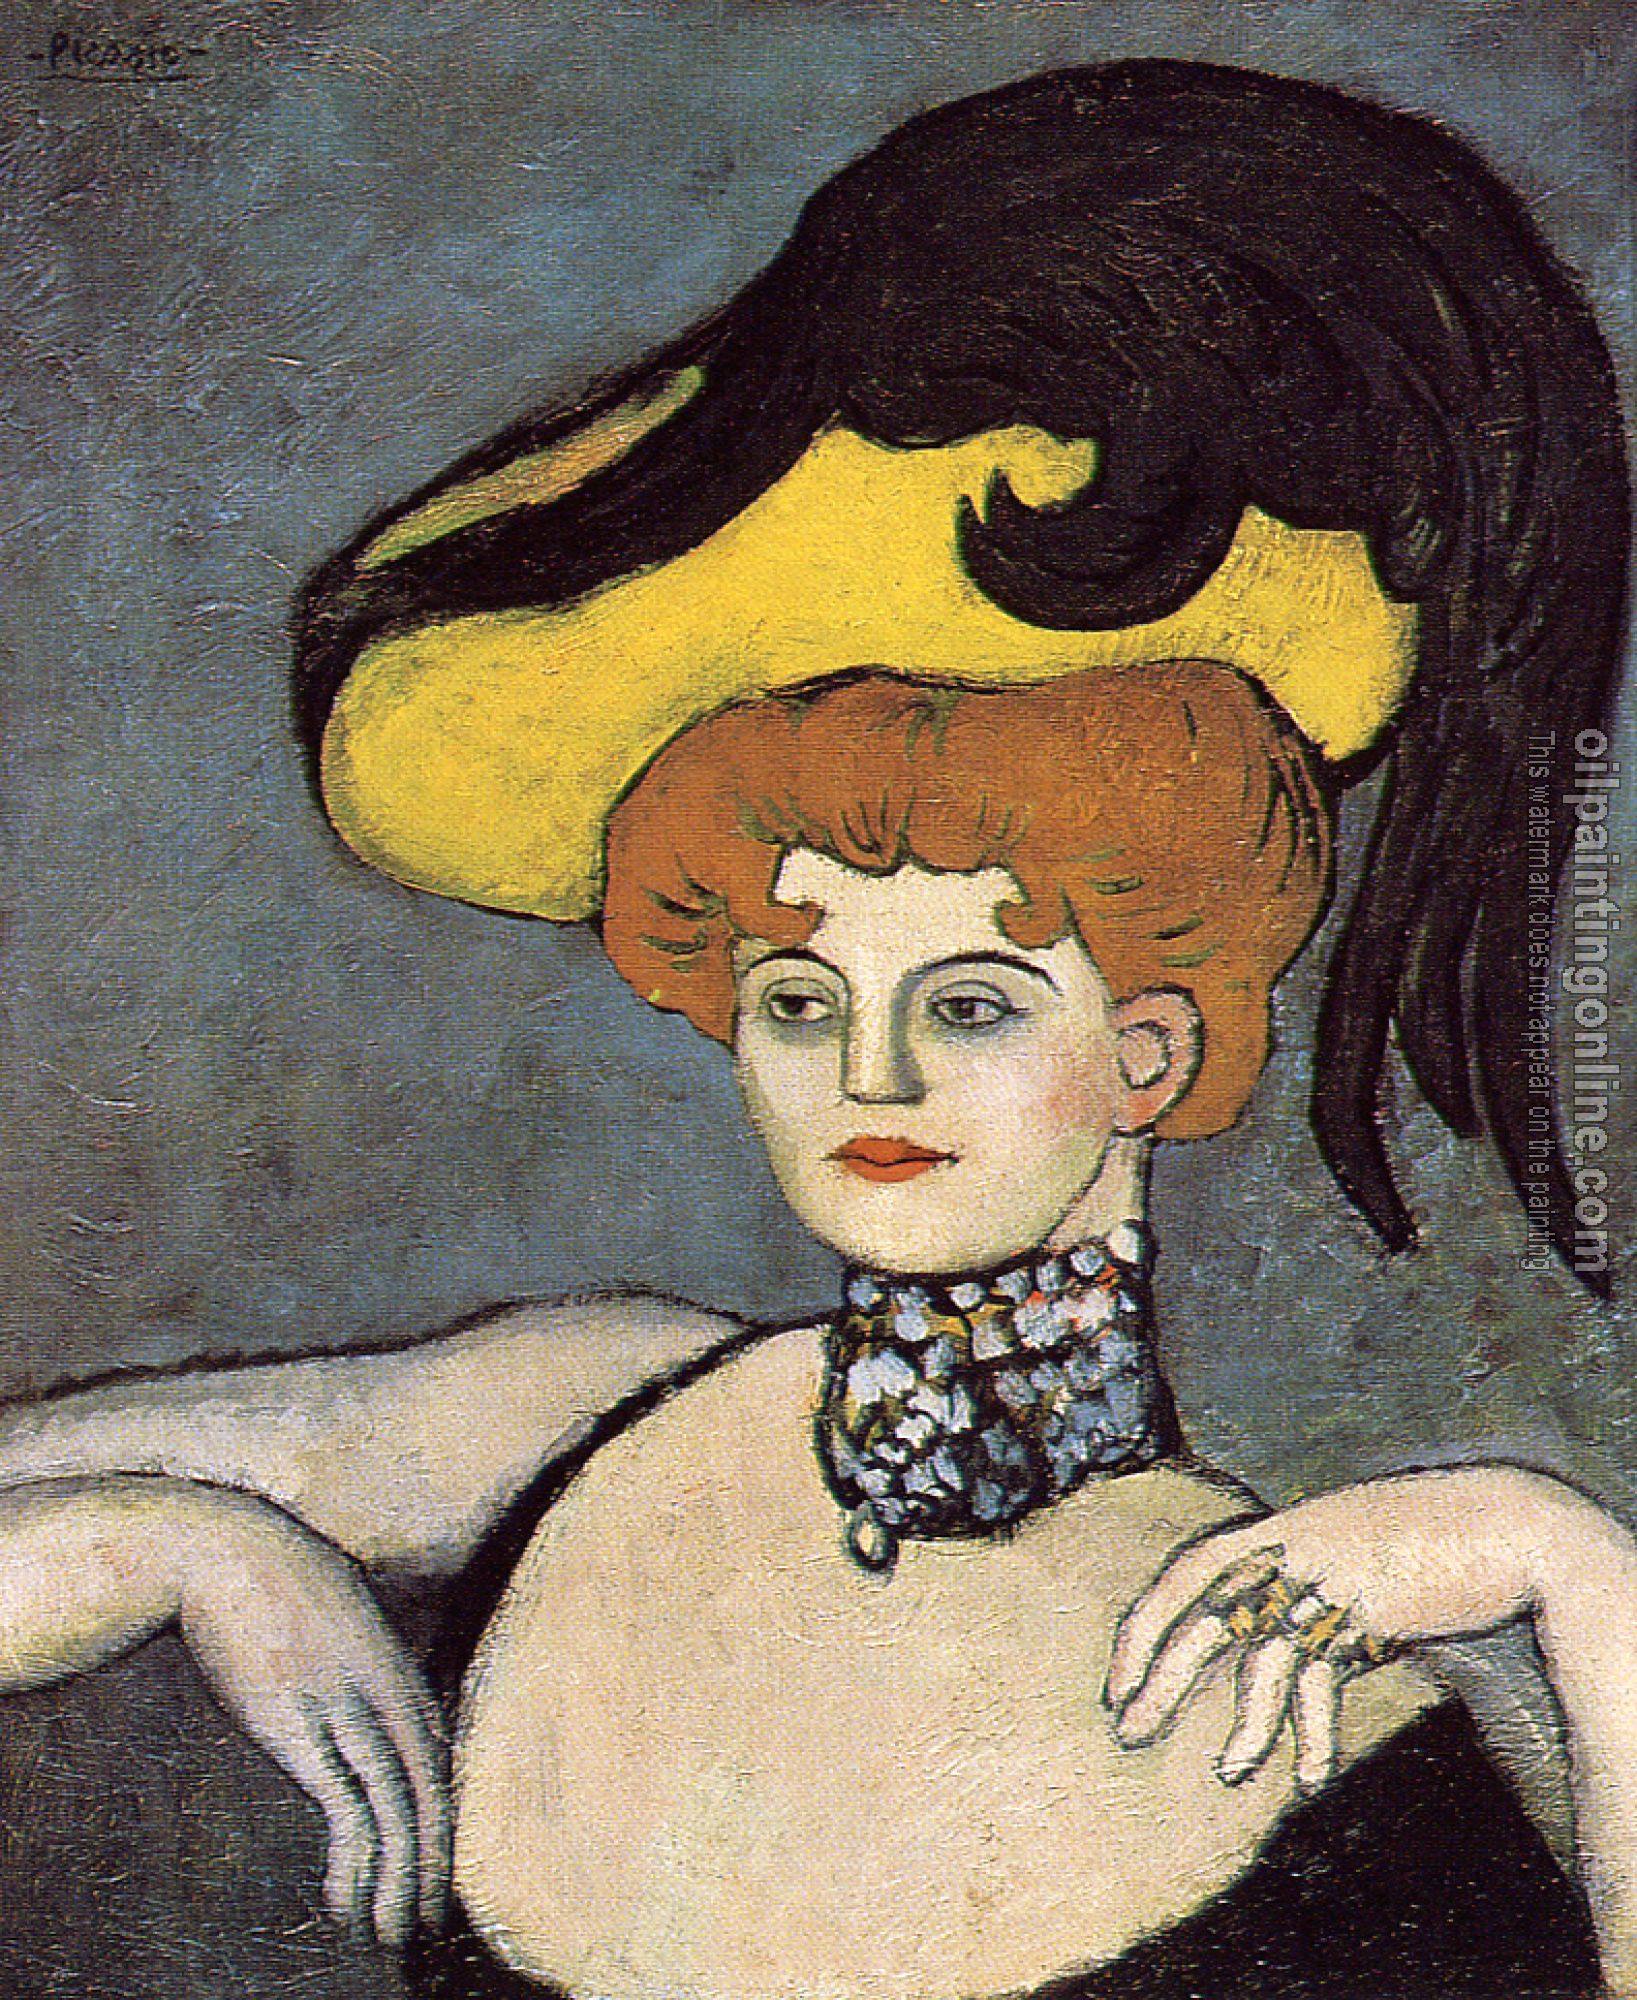 Picasso, Pablo - courtesan with a jeweled necklace